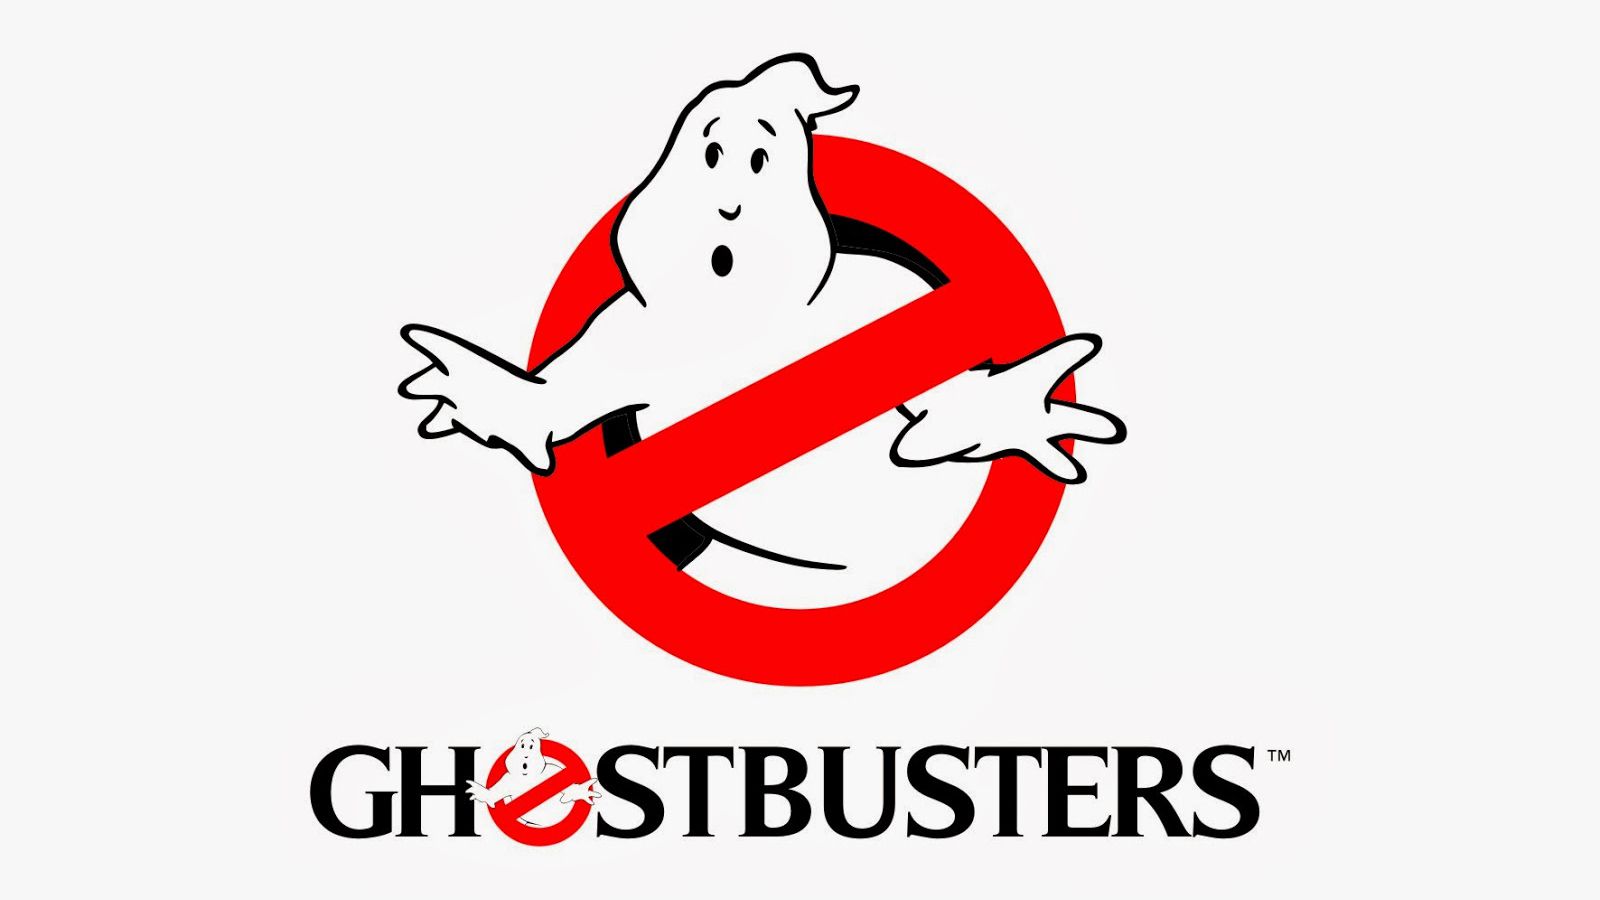 Ghostbusters franchise in the works, second movie to feature dudes again - The Verge